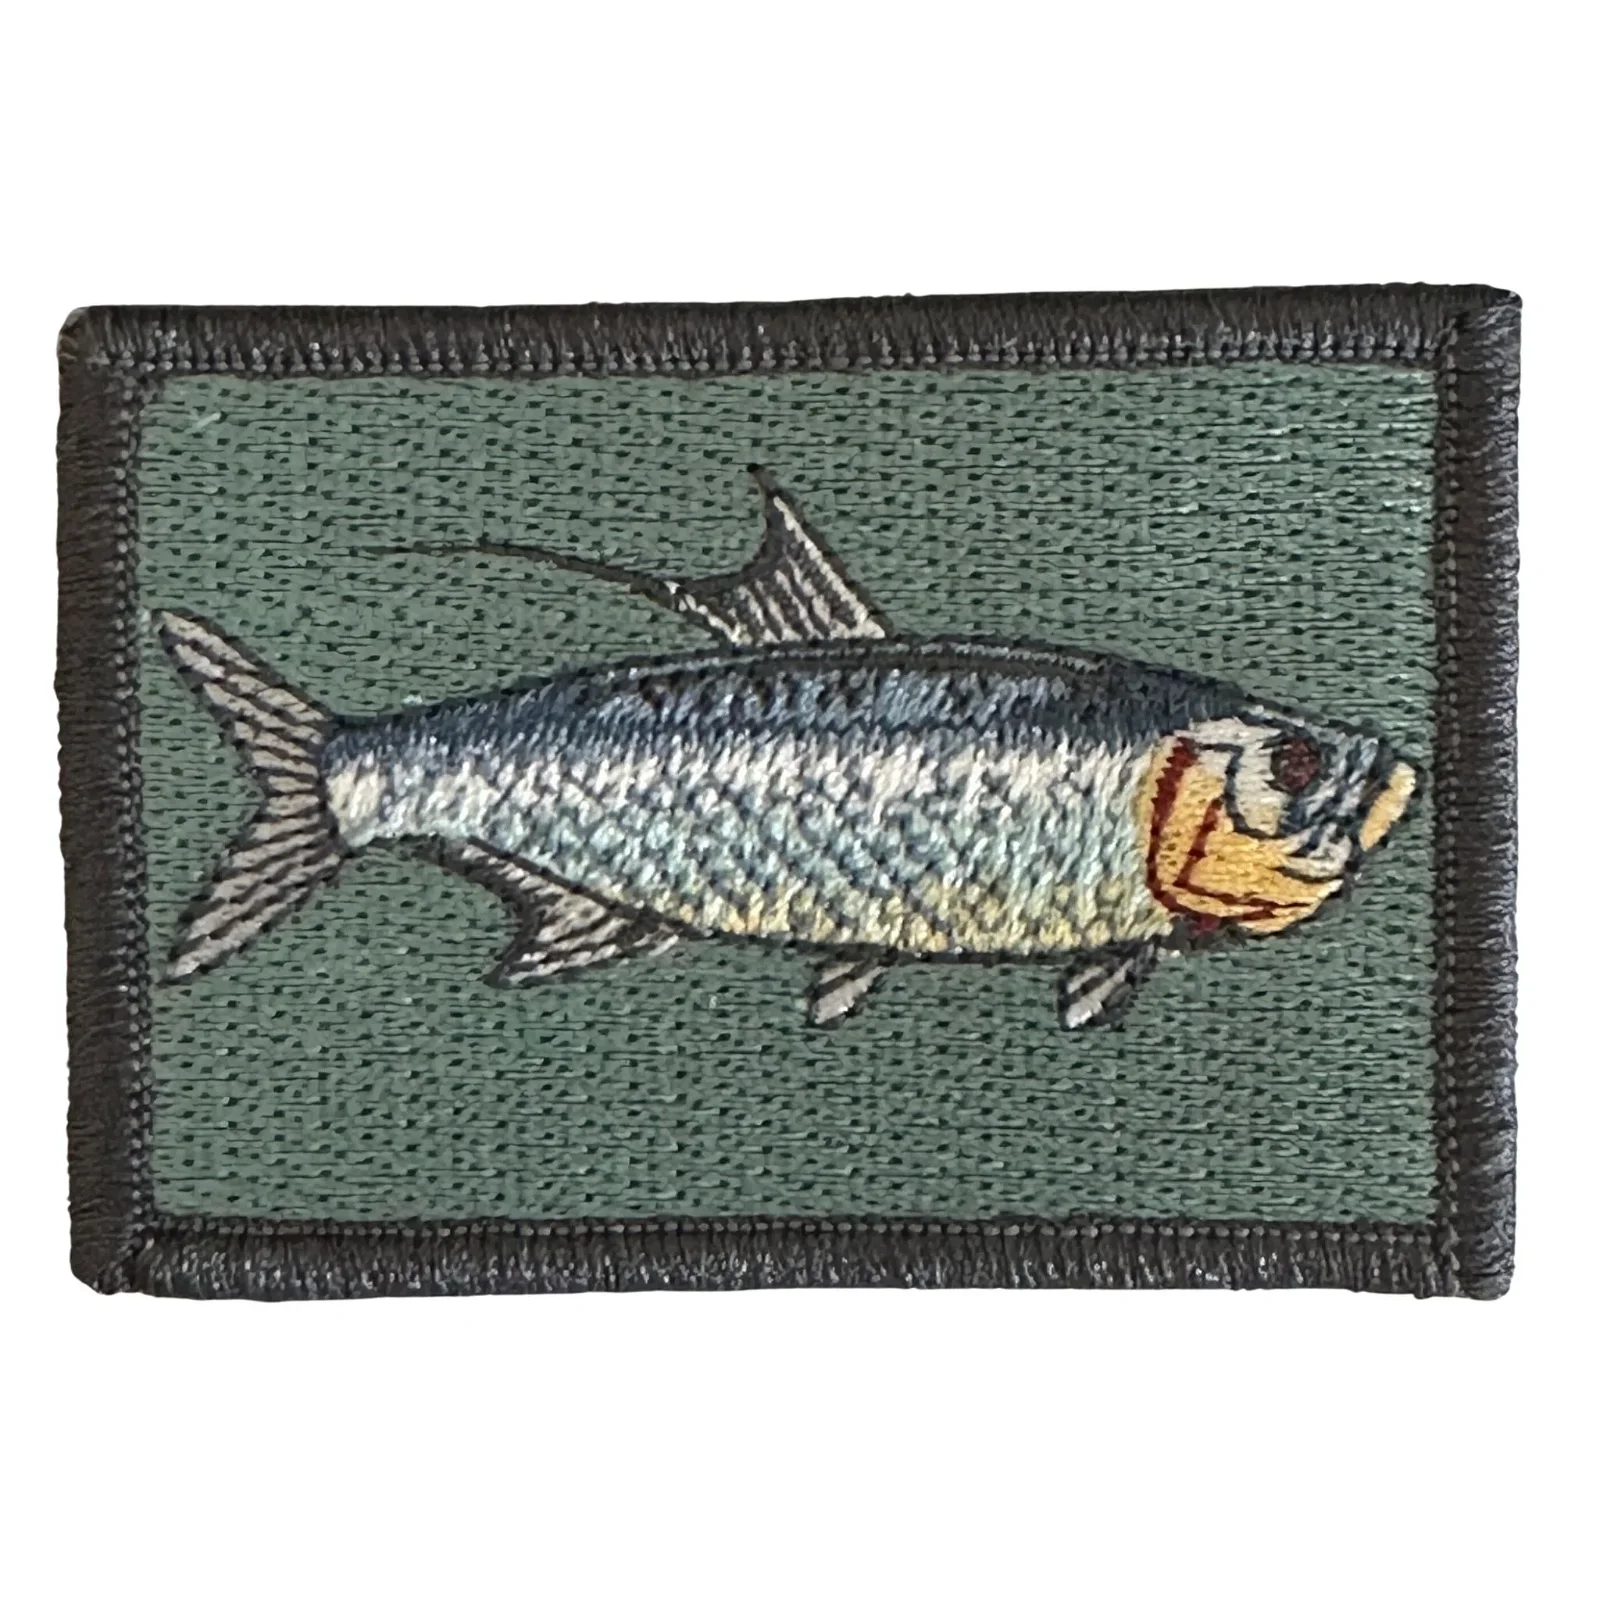 Image of Tarpon Patch - Full Color